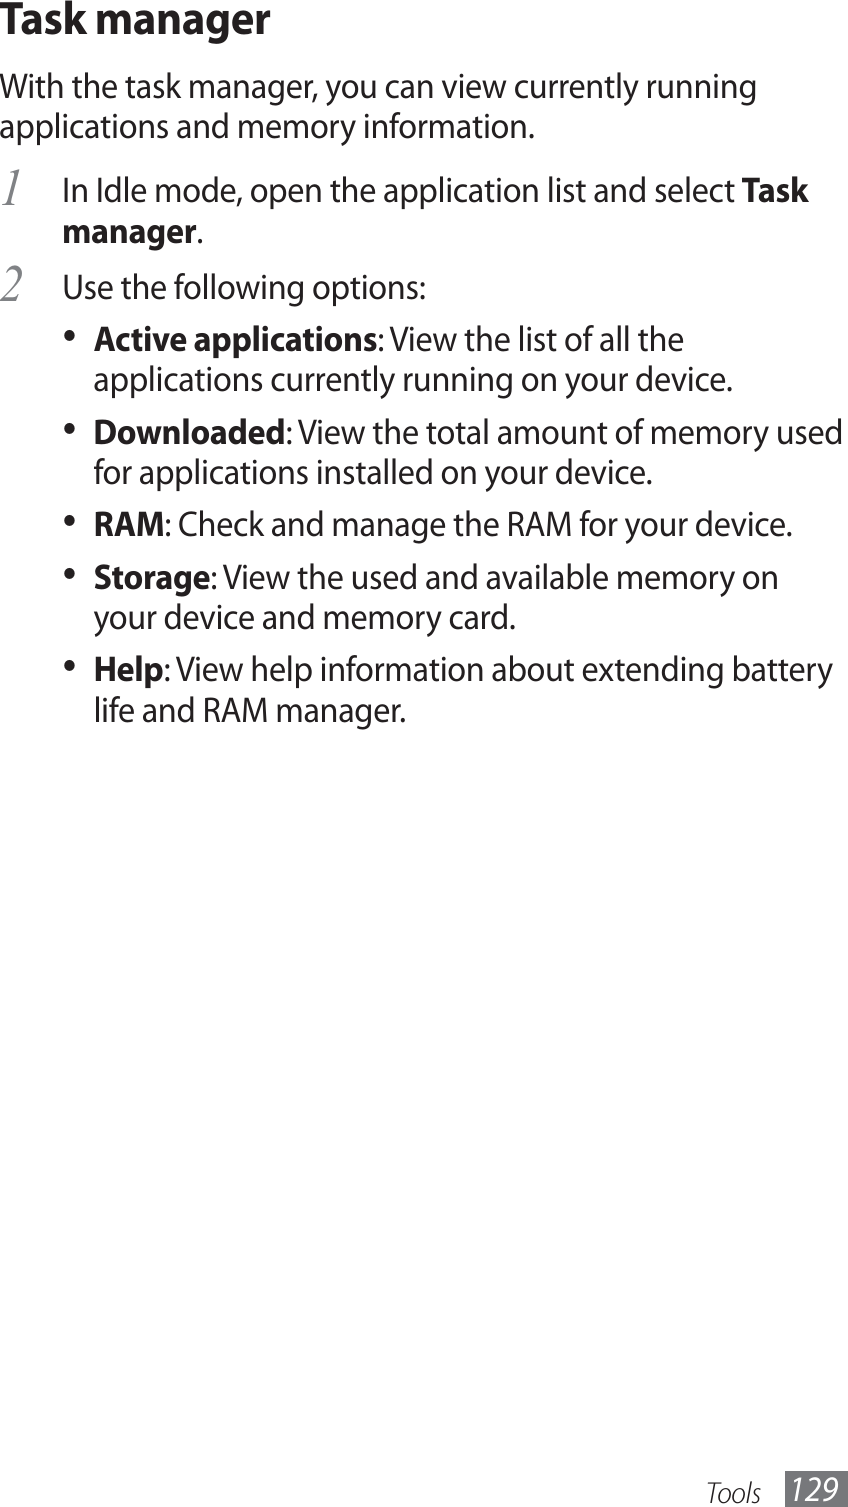 Tools 129Task managerWith the task manager, you can view currently running applications and memory information. In Idle mode, open the application list and select 1 Task manager.Use the following options:2 Active applications•  : View the list of all the applications currently running on your device.Downloaded•  : View the total amount of memory used for applications installed on your device.RAM•  : Check and manage the RAM for your device.Storage•  : View the used and available memory on your device and memory card.Help•  : View help information about extending battery life and RAM manager.